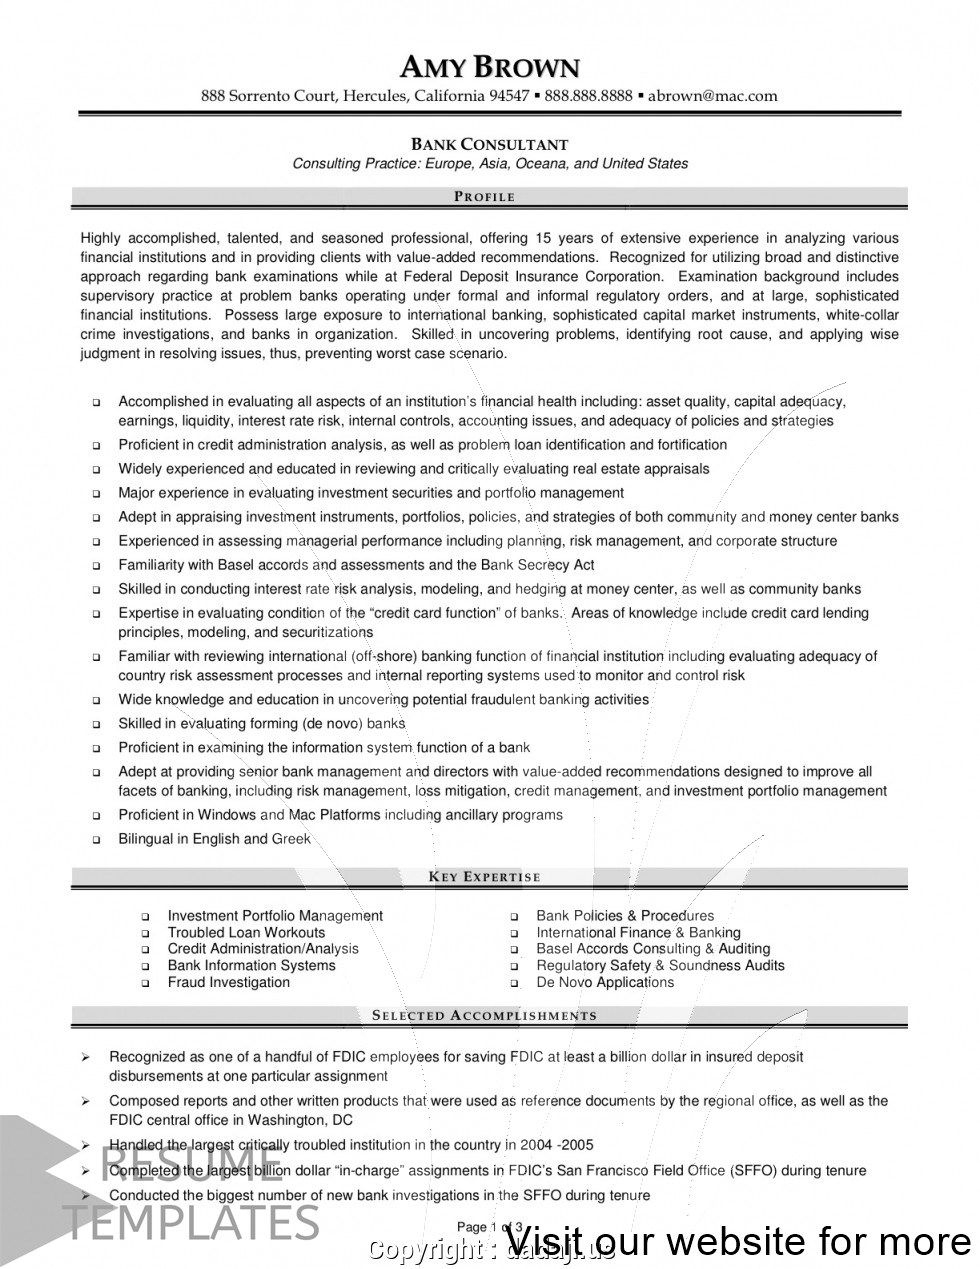 Resume Example Australia 2019 In 2020 (With Images) | Statement within Personal Investment Policy Statement Template